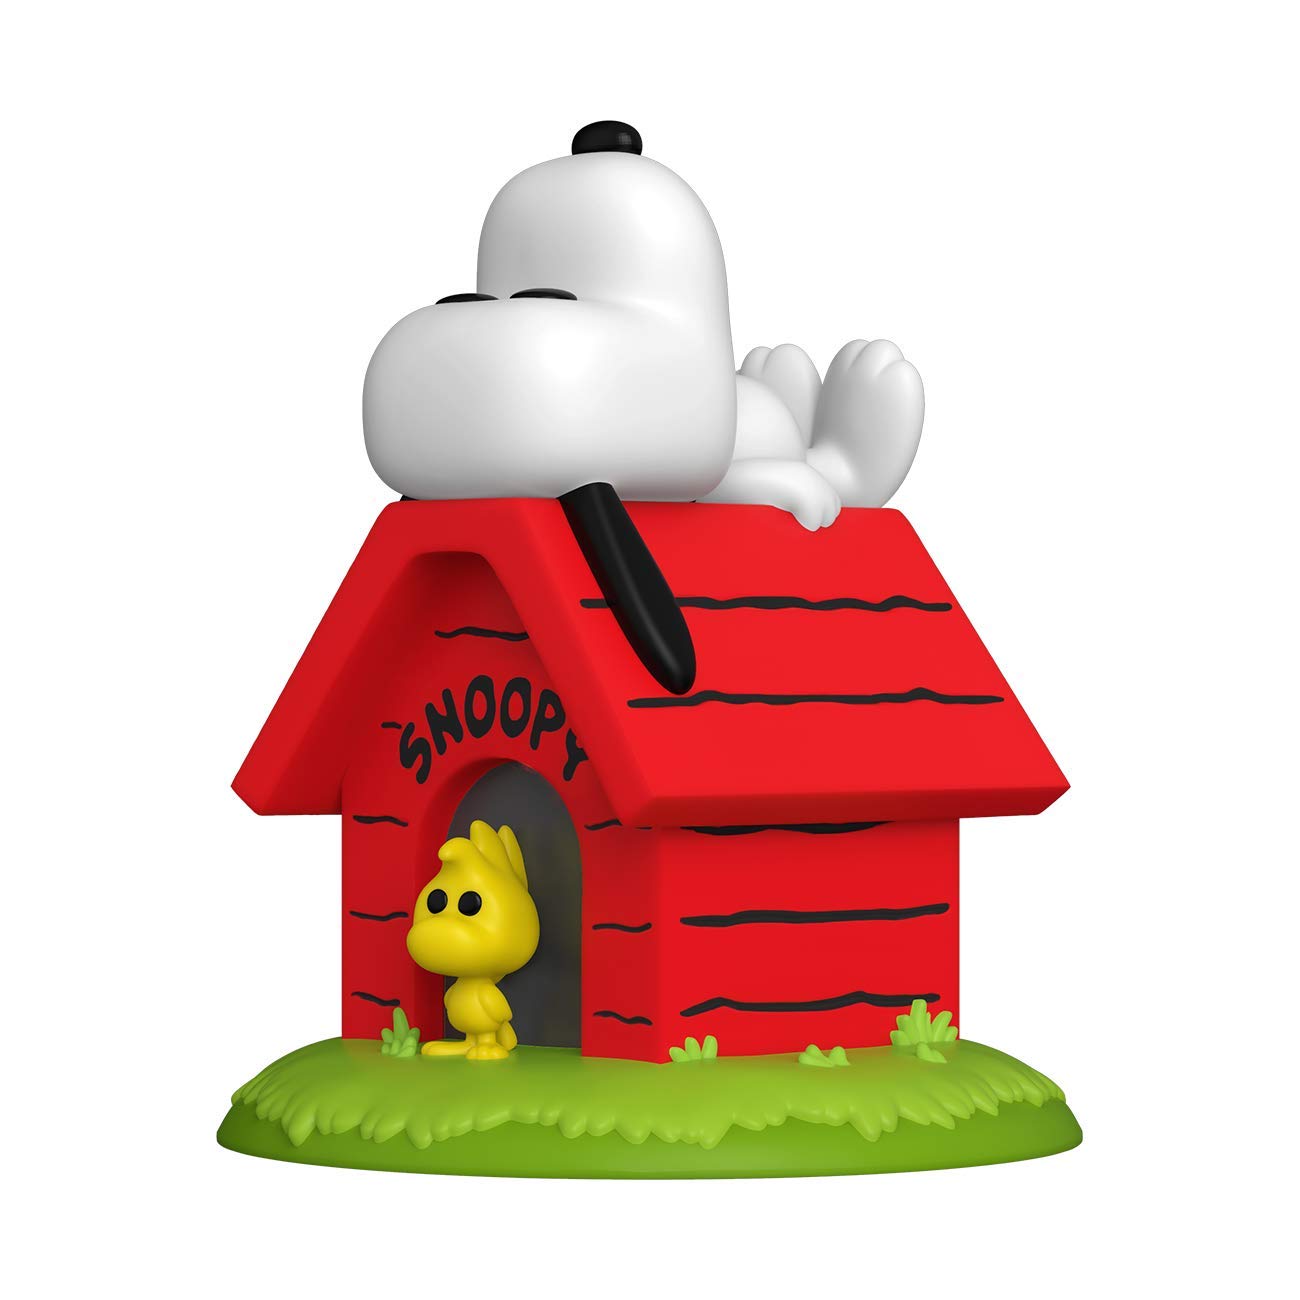 Funko POP! Deluxe: Peanuts - Snoopy on Doghouse